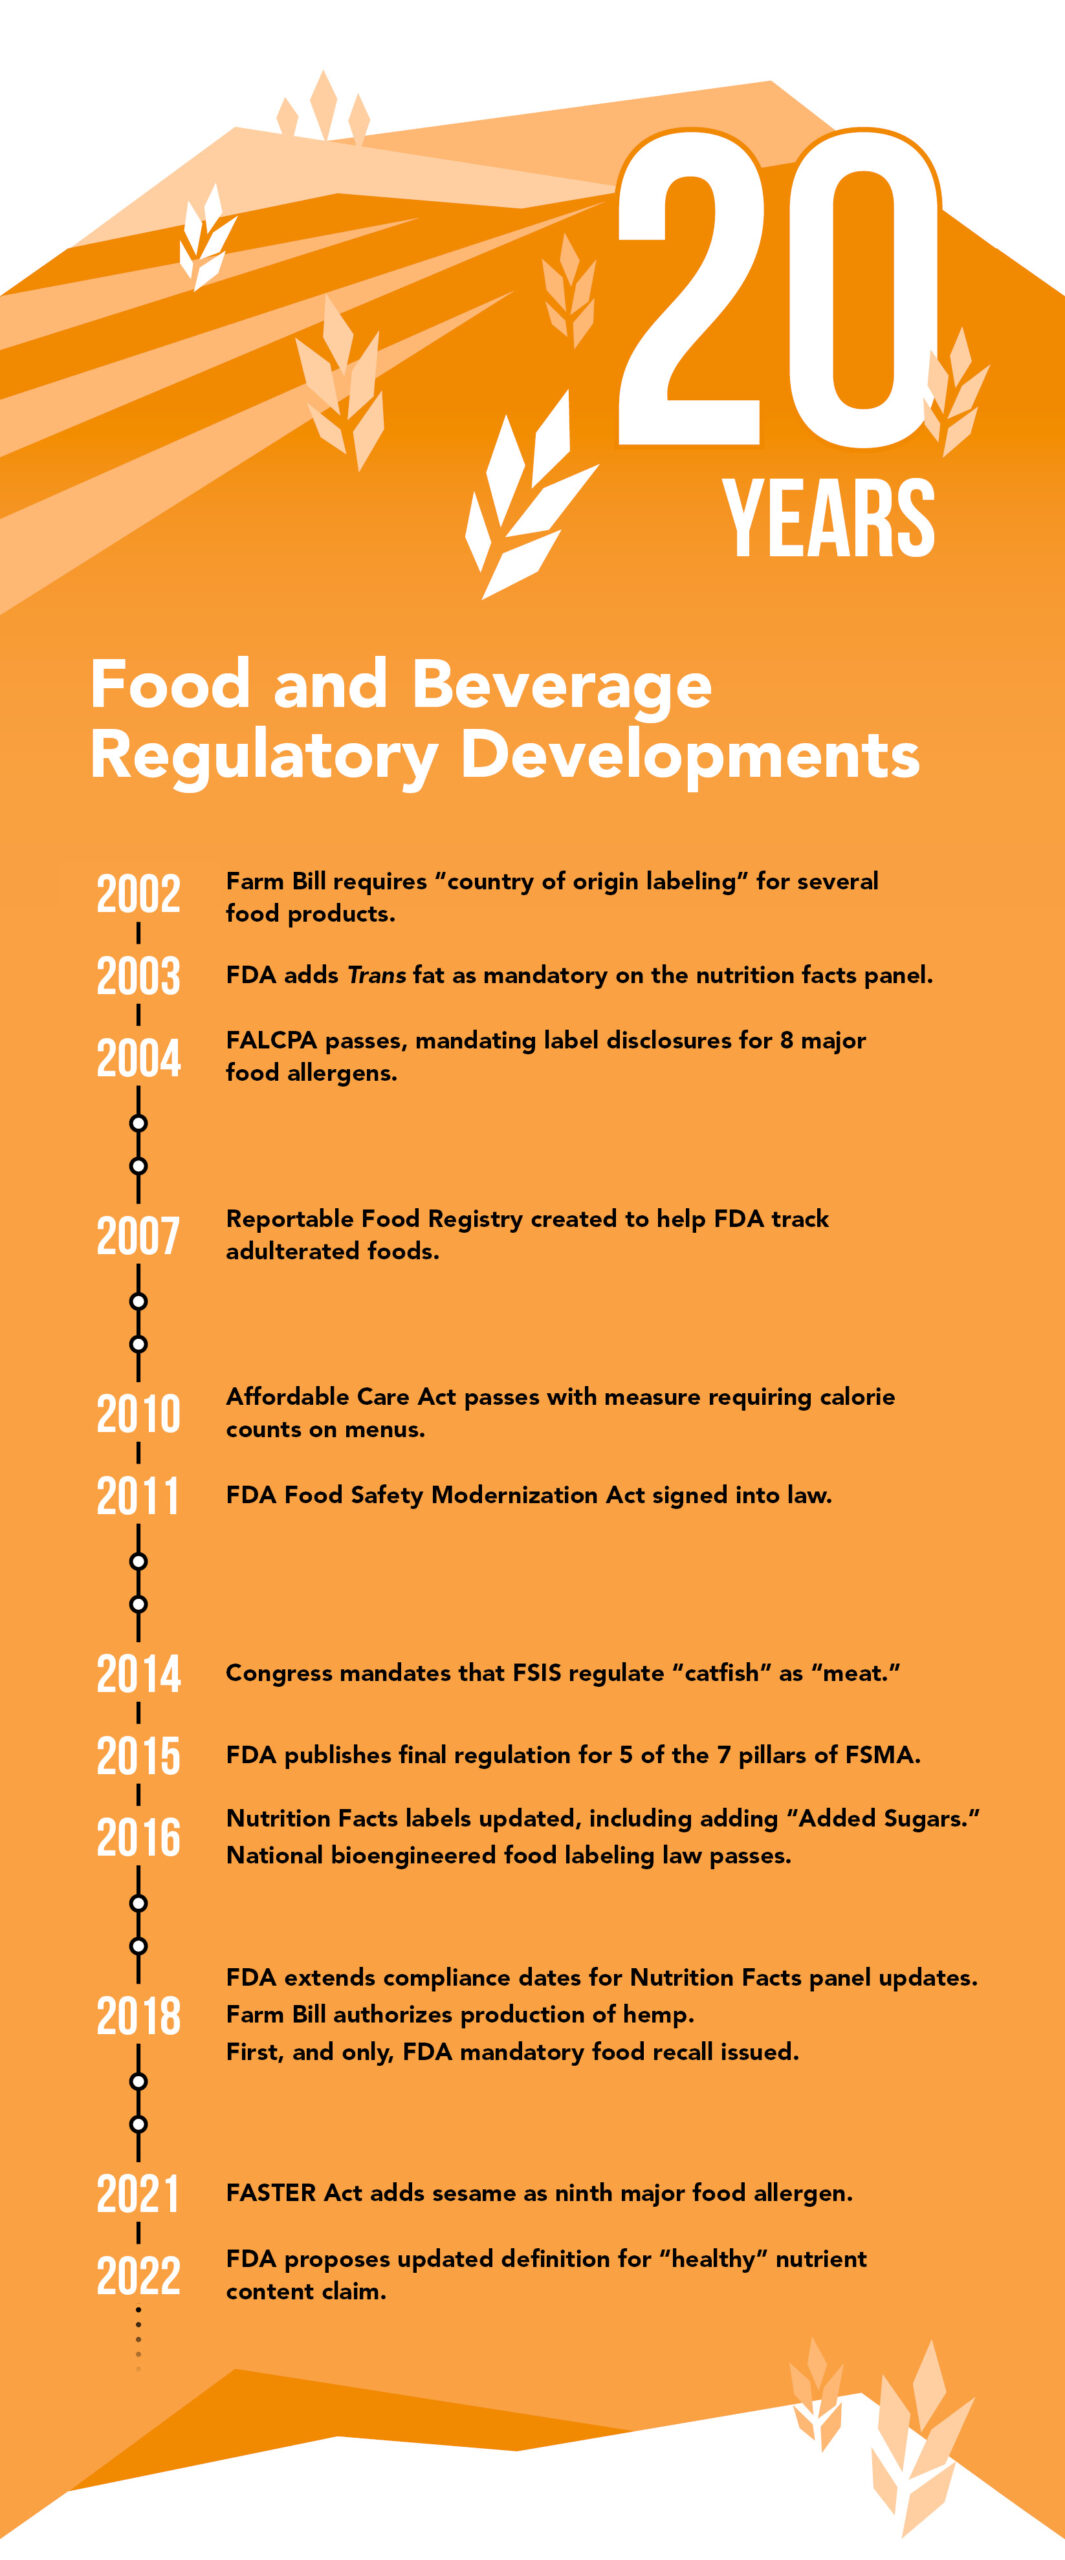 an infographic featuring a timeline of events in food and beverage regulation from 2002 to 2022